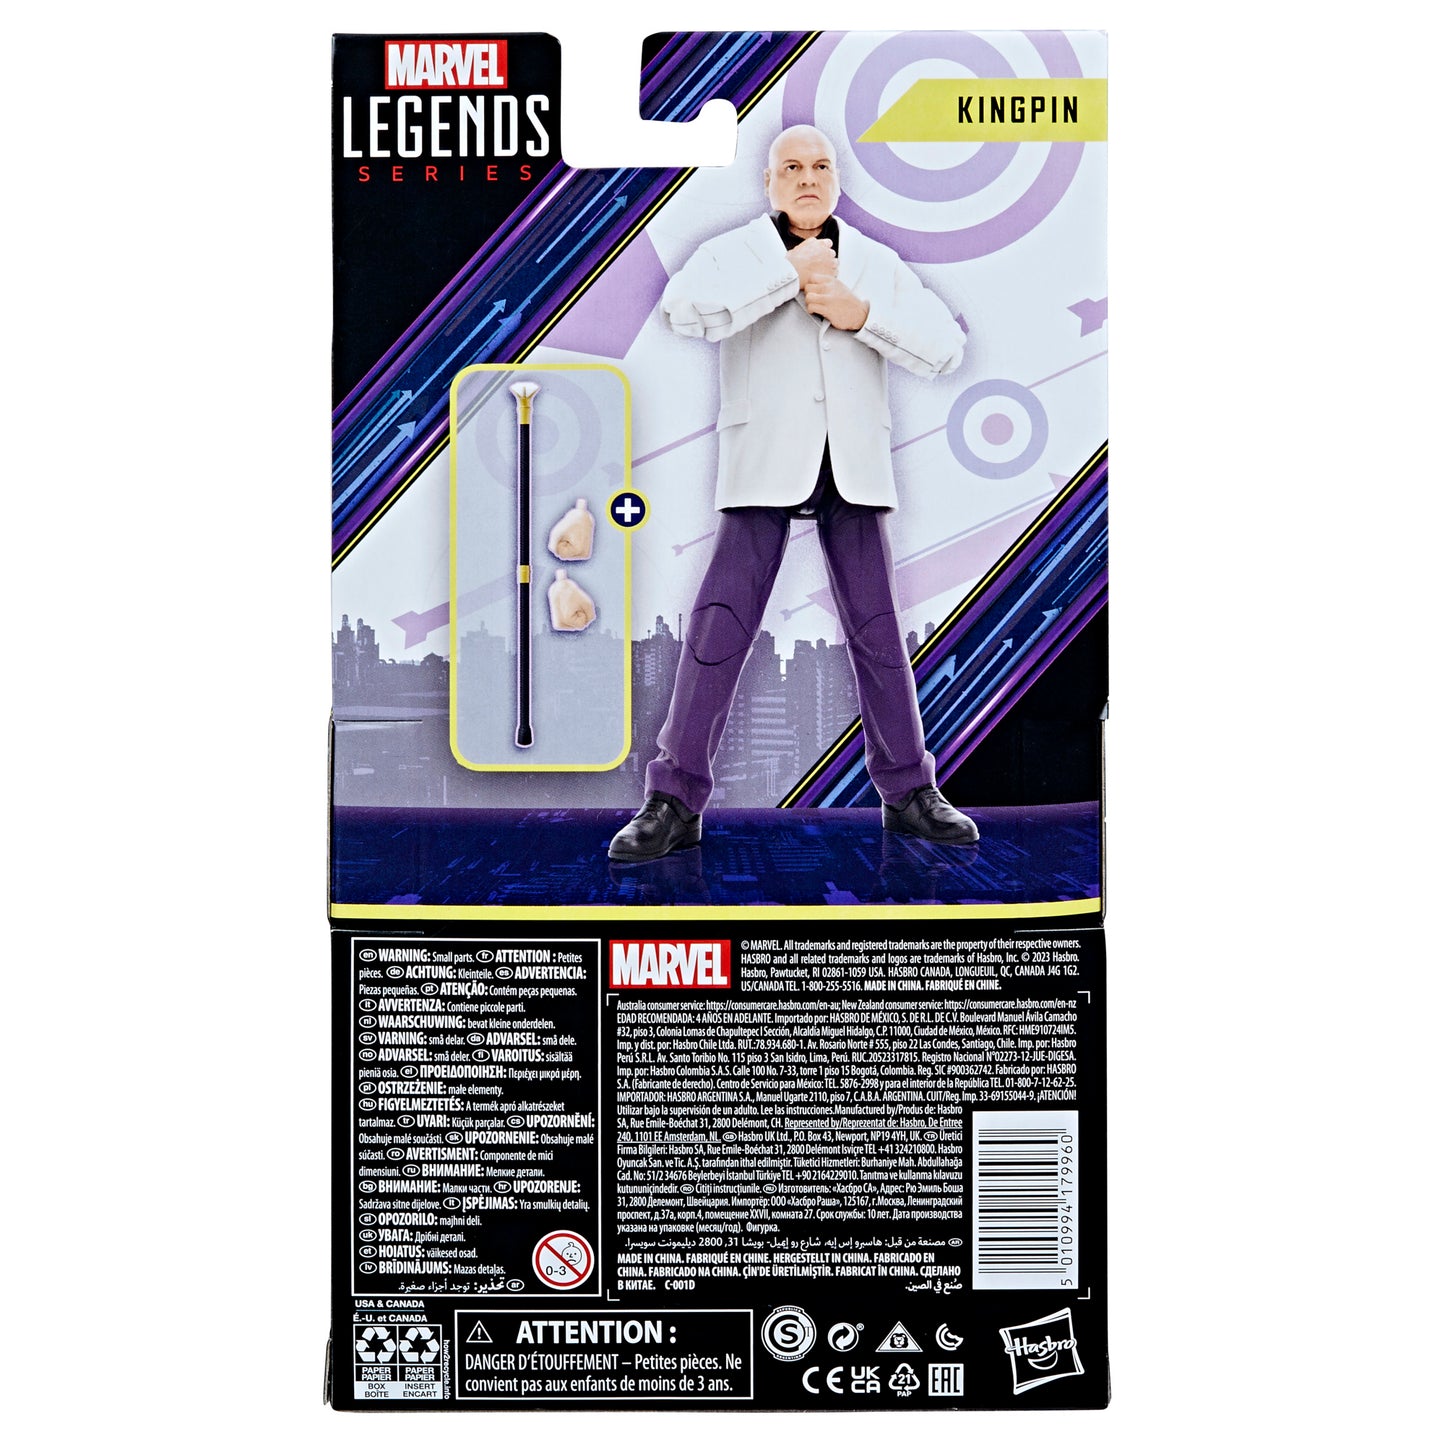 Marvel legends Hawkeye Kingpin Back view of the box - Heretoserveyou